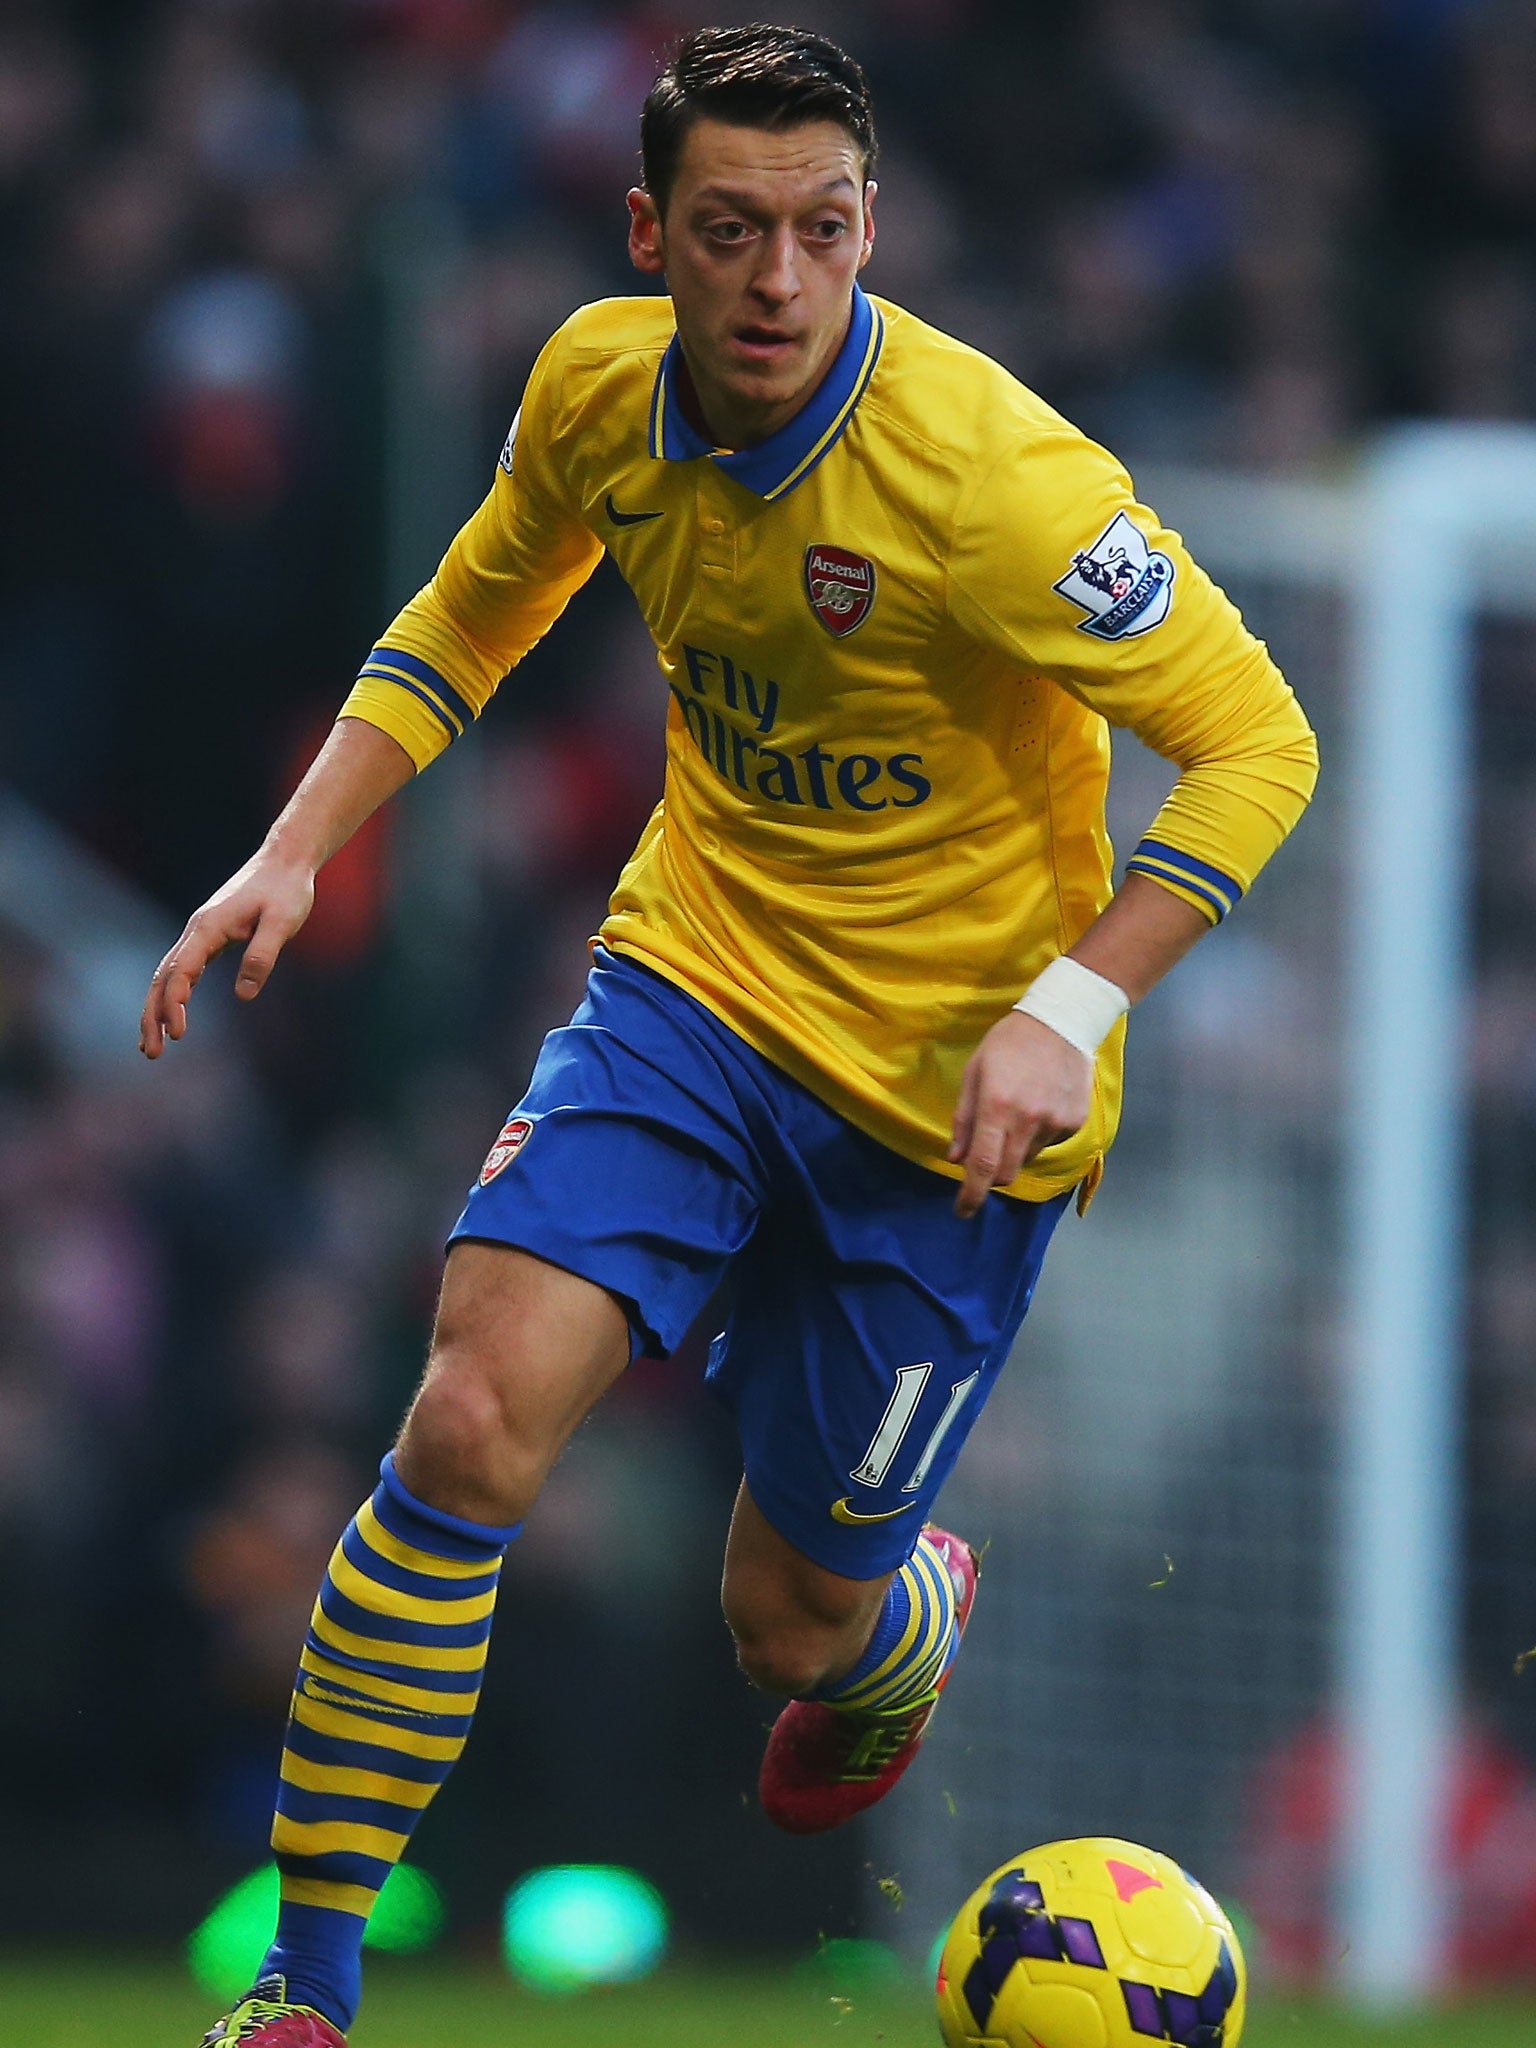 The arrival of Mesut Özil has had a positive effect on Arsenal both on and off the pitch